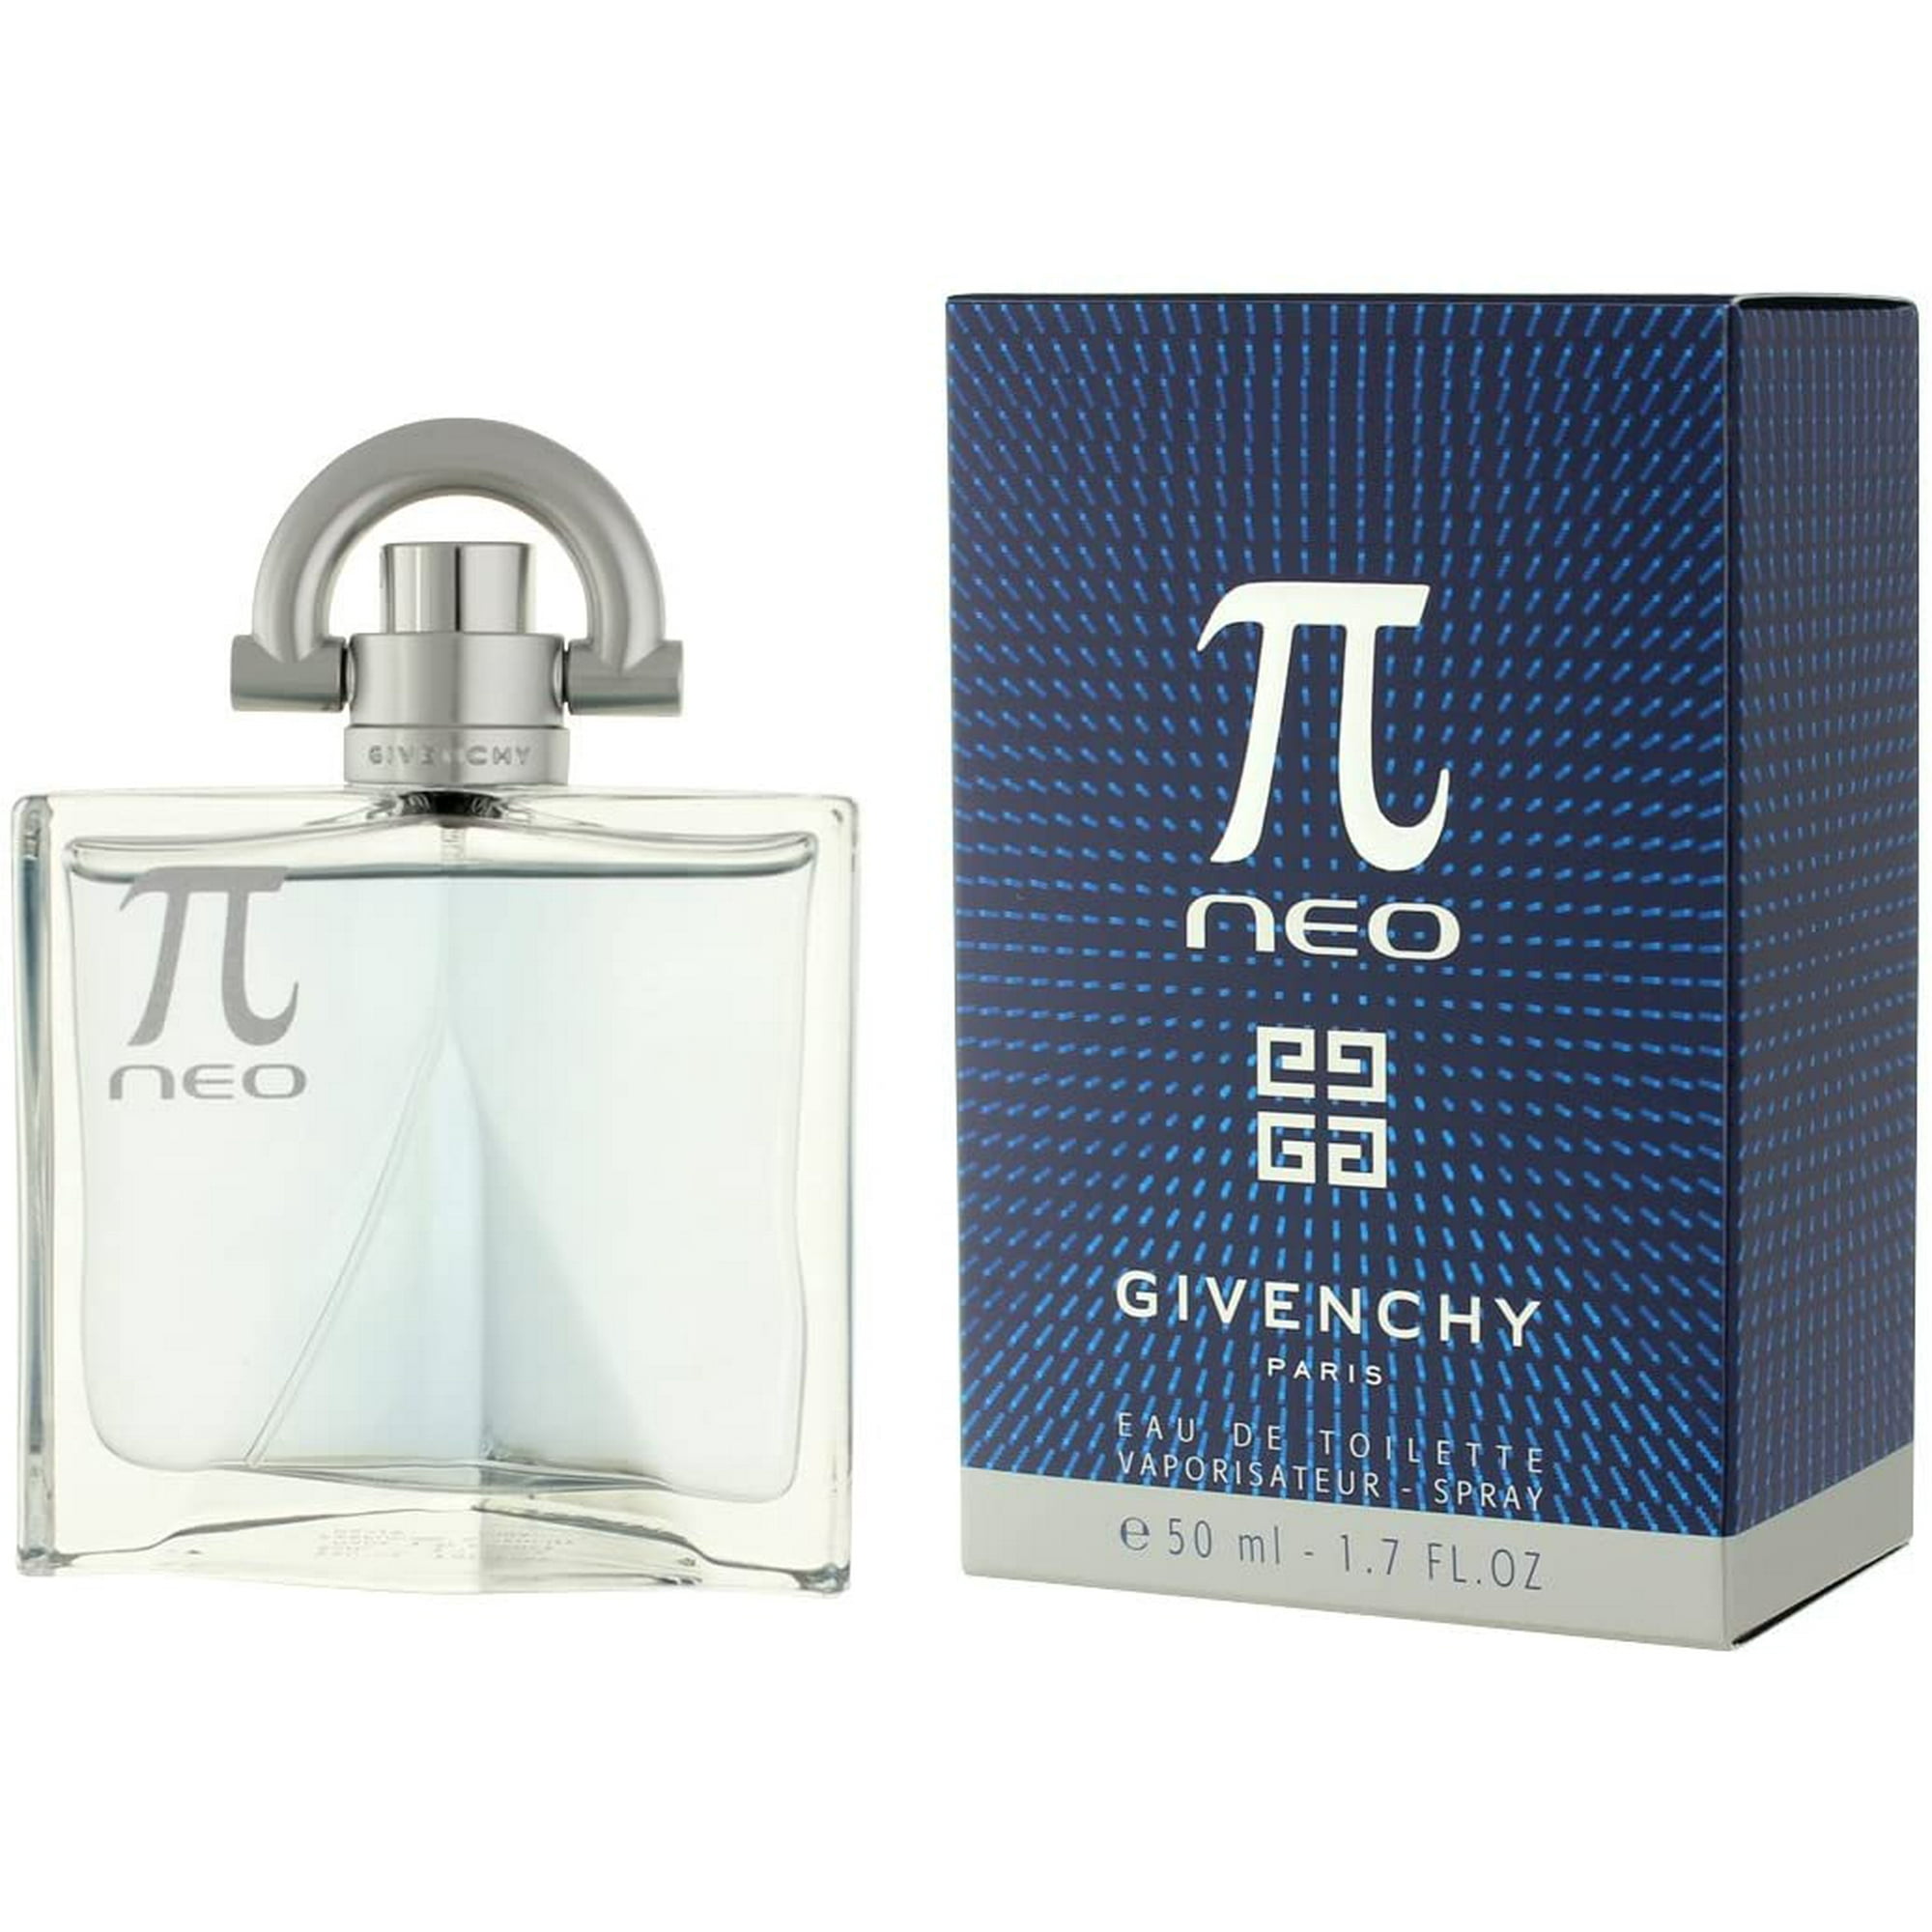 Givenchy Pi Neo EDT for him 50mL | Walmart Canada